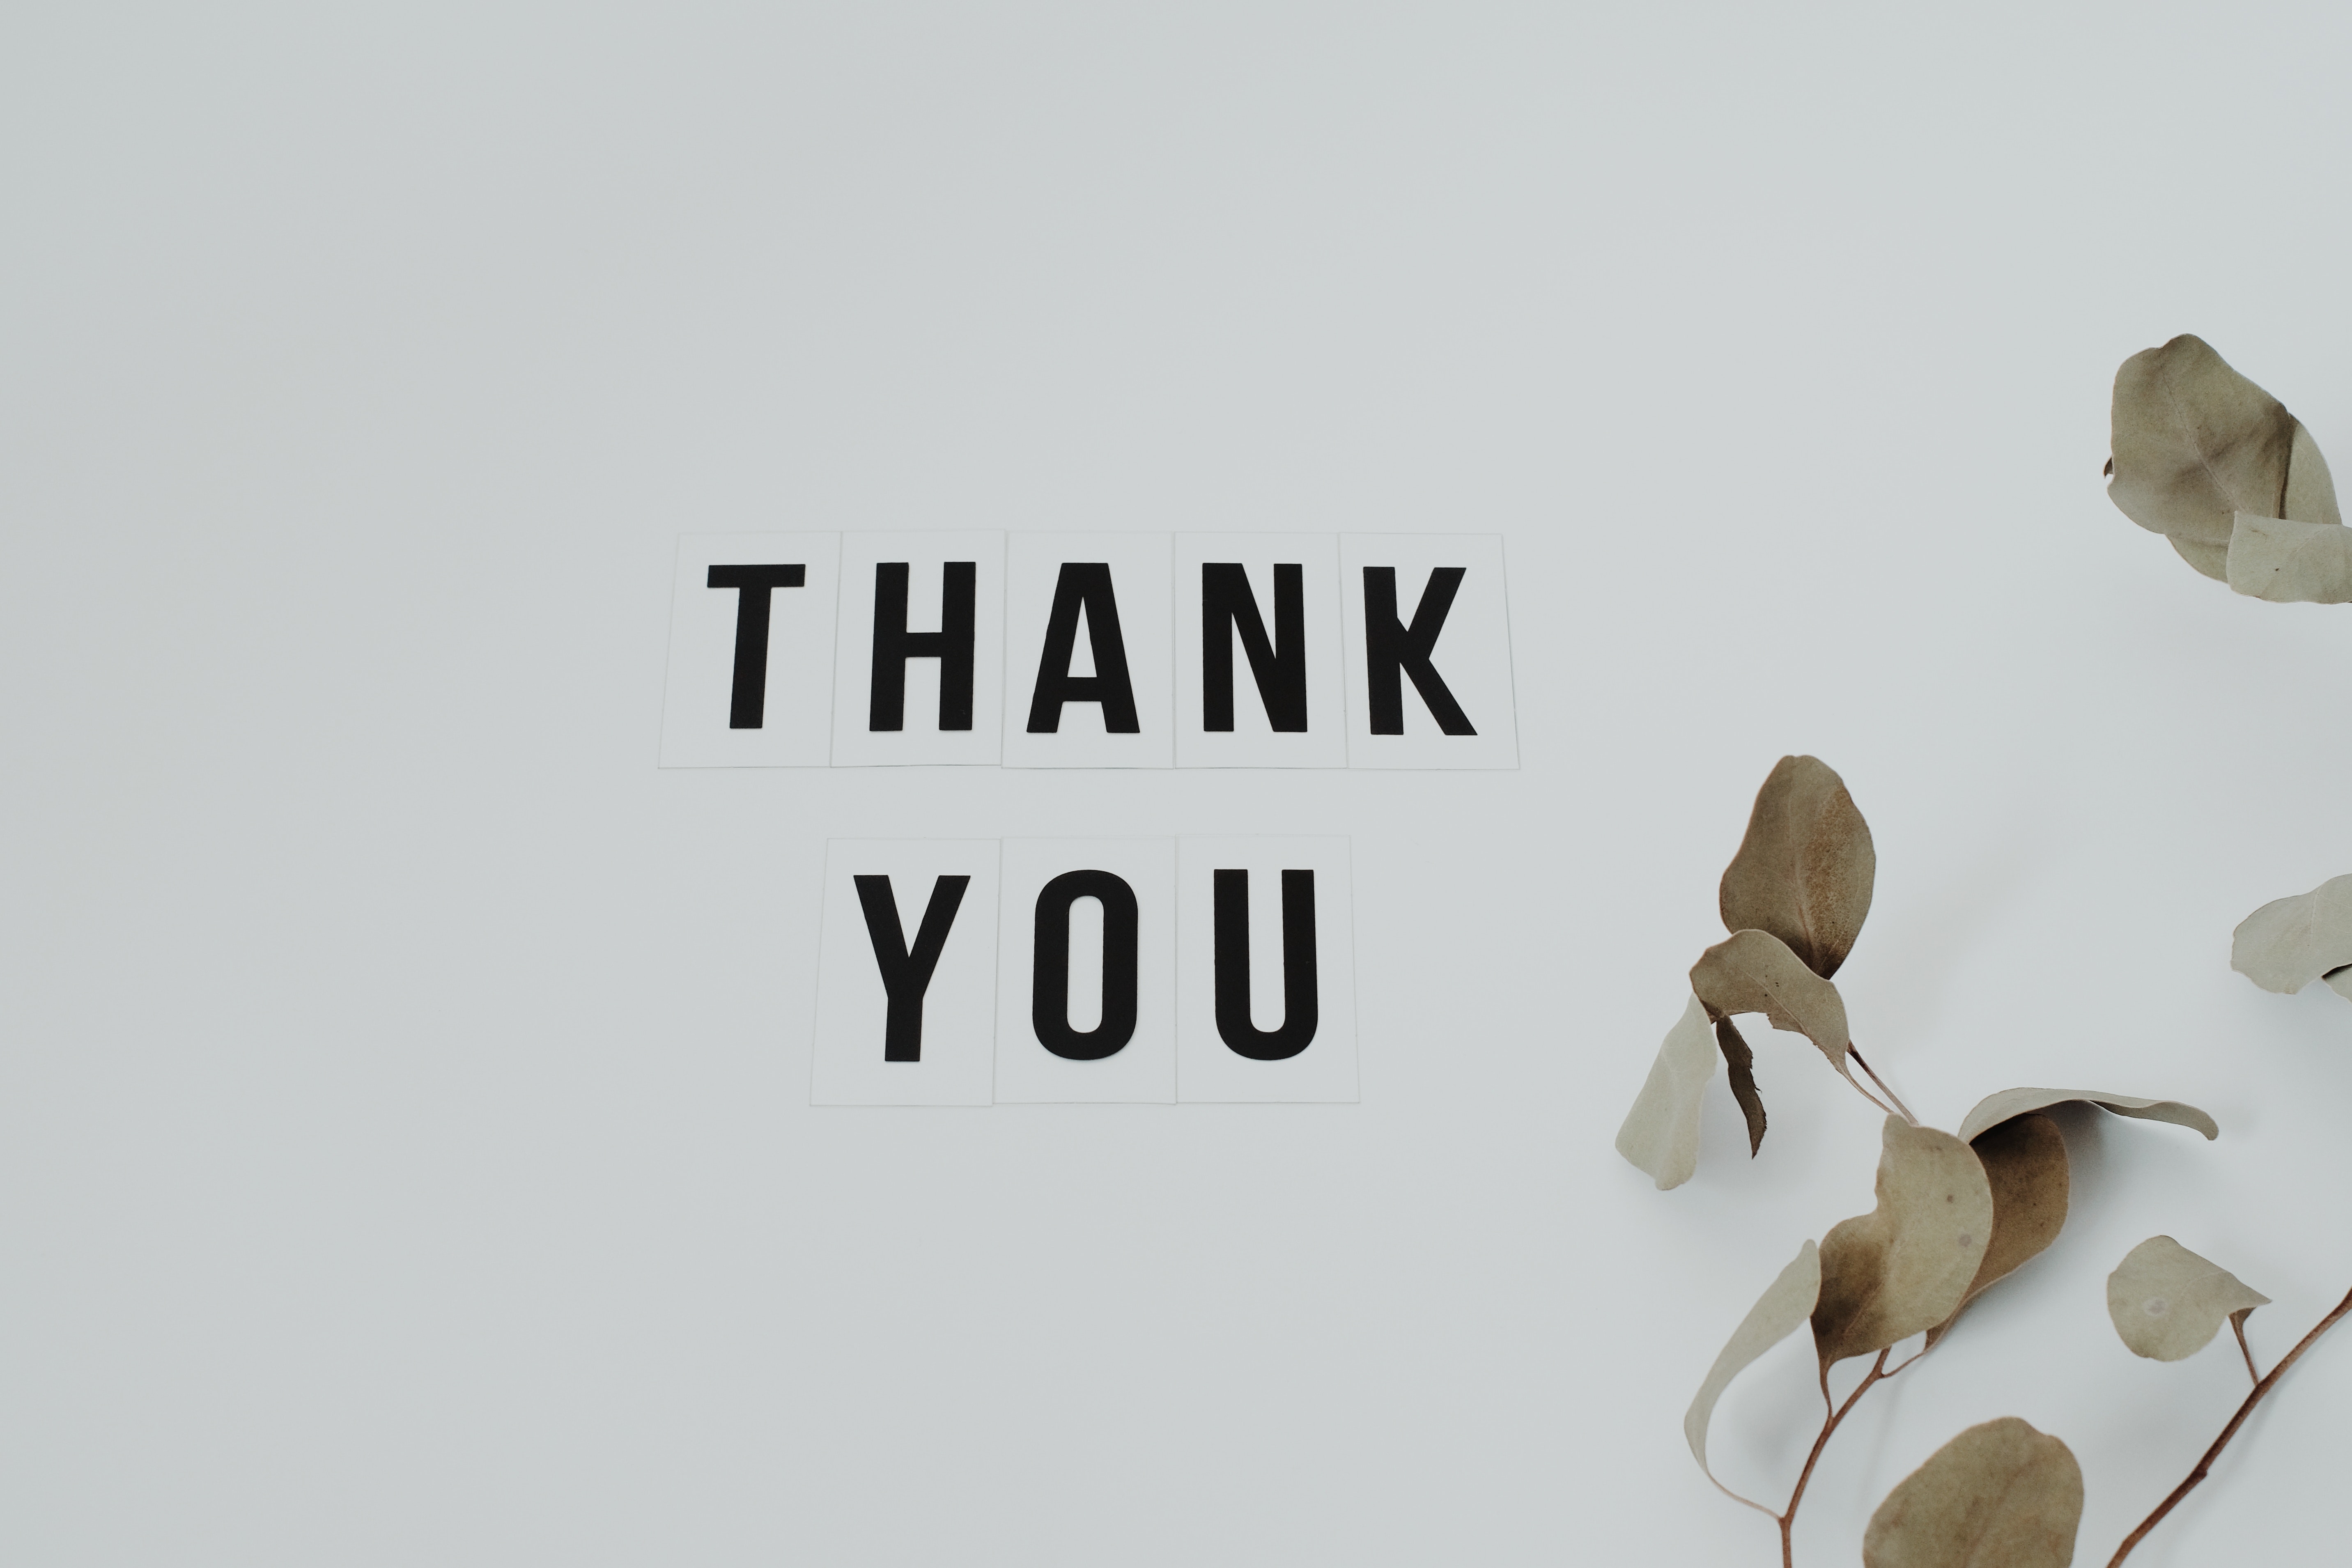 Best Thank You Image · 100% Free Downloads